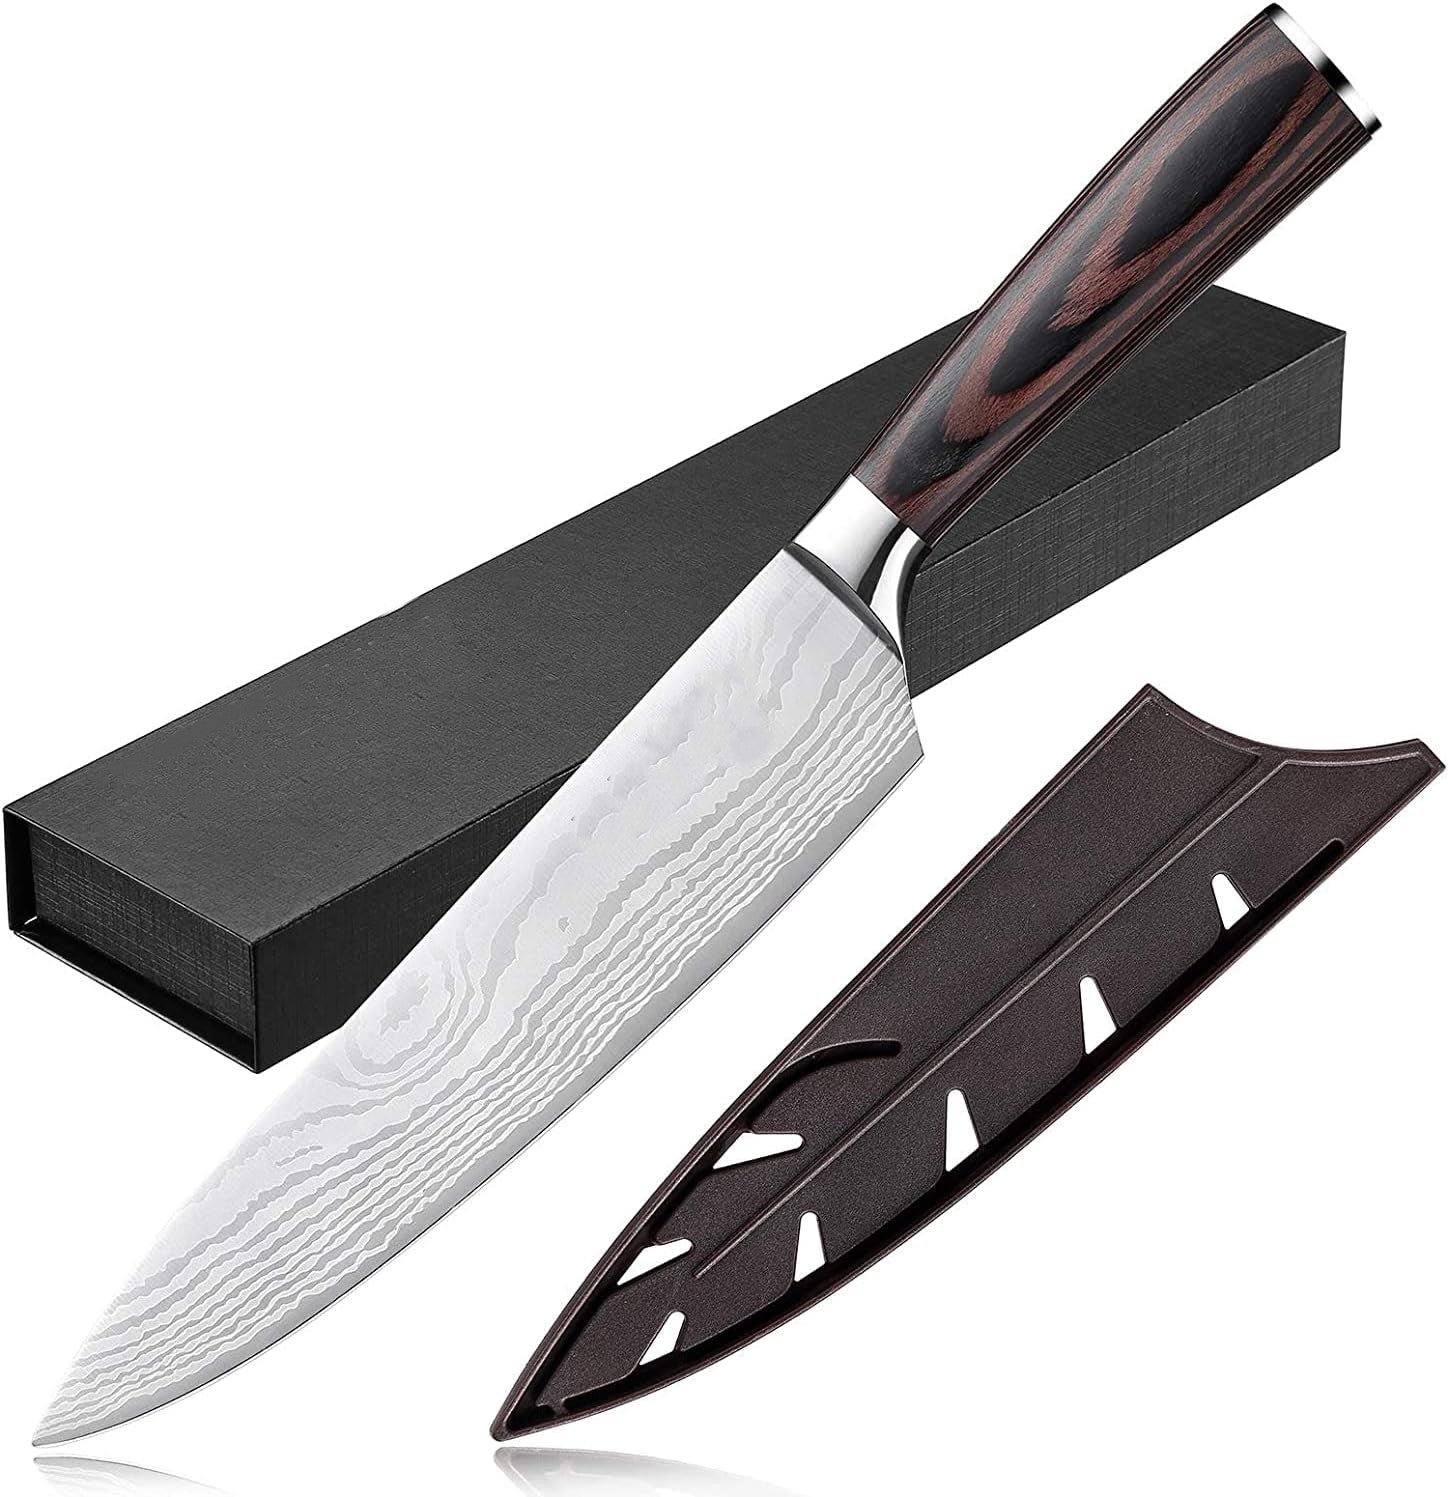 Chef Knife 8 Inch Forged, Ultra Sharp Kitchen Knife Made of German High Carbon Stainless Steel - SharpWorx